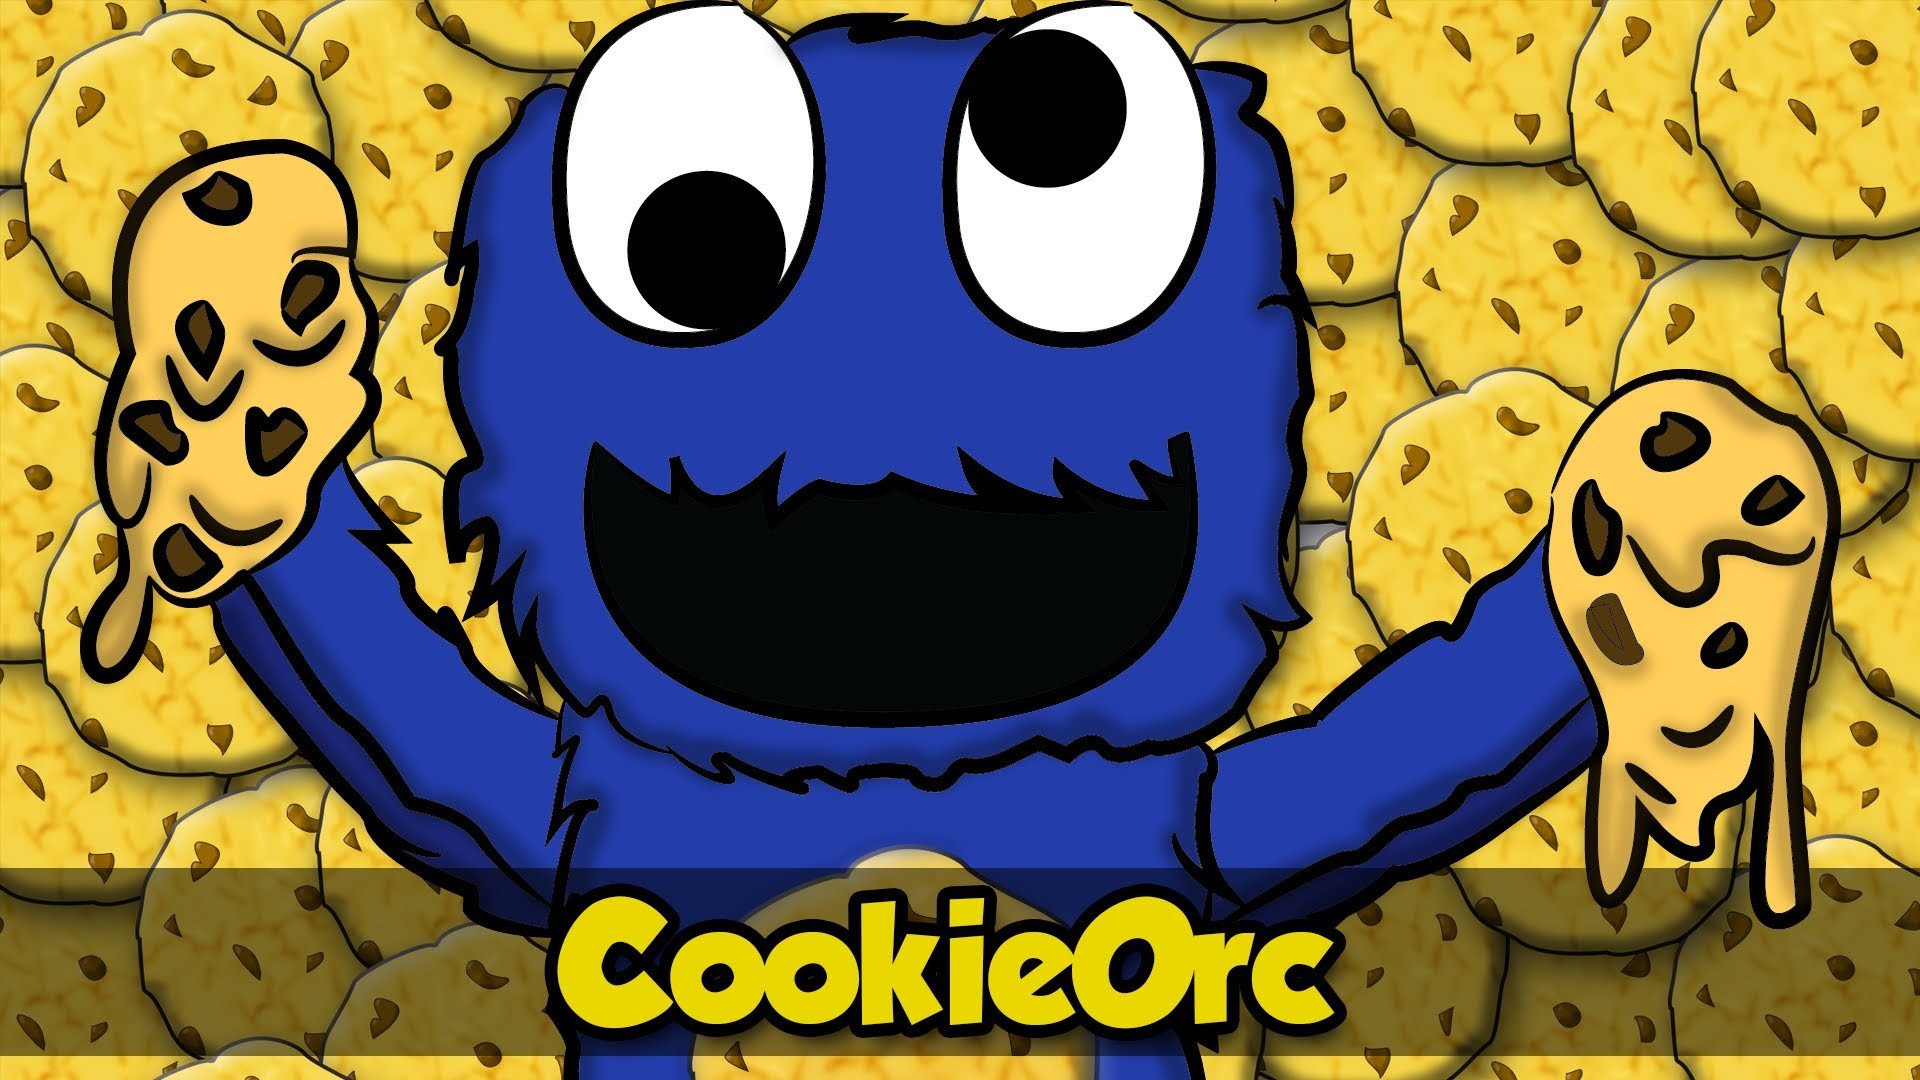 1920x1080 Free HD Cookie Monster Wallpapers Download.